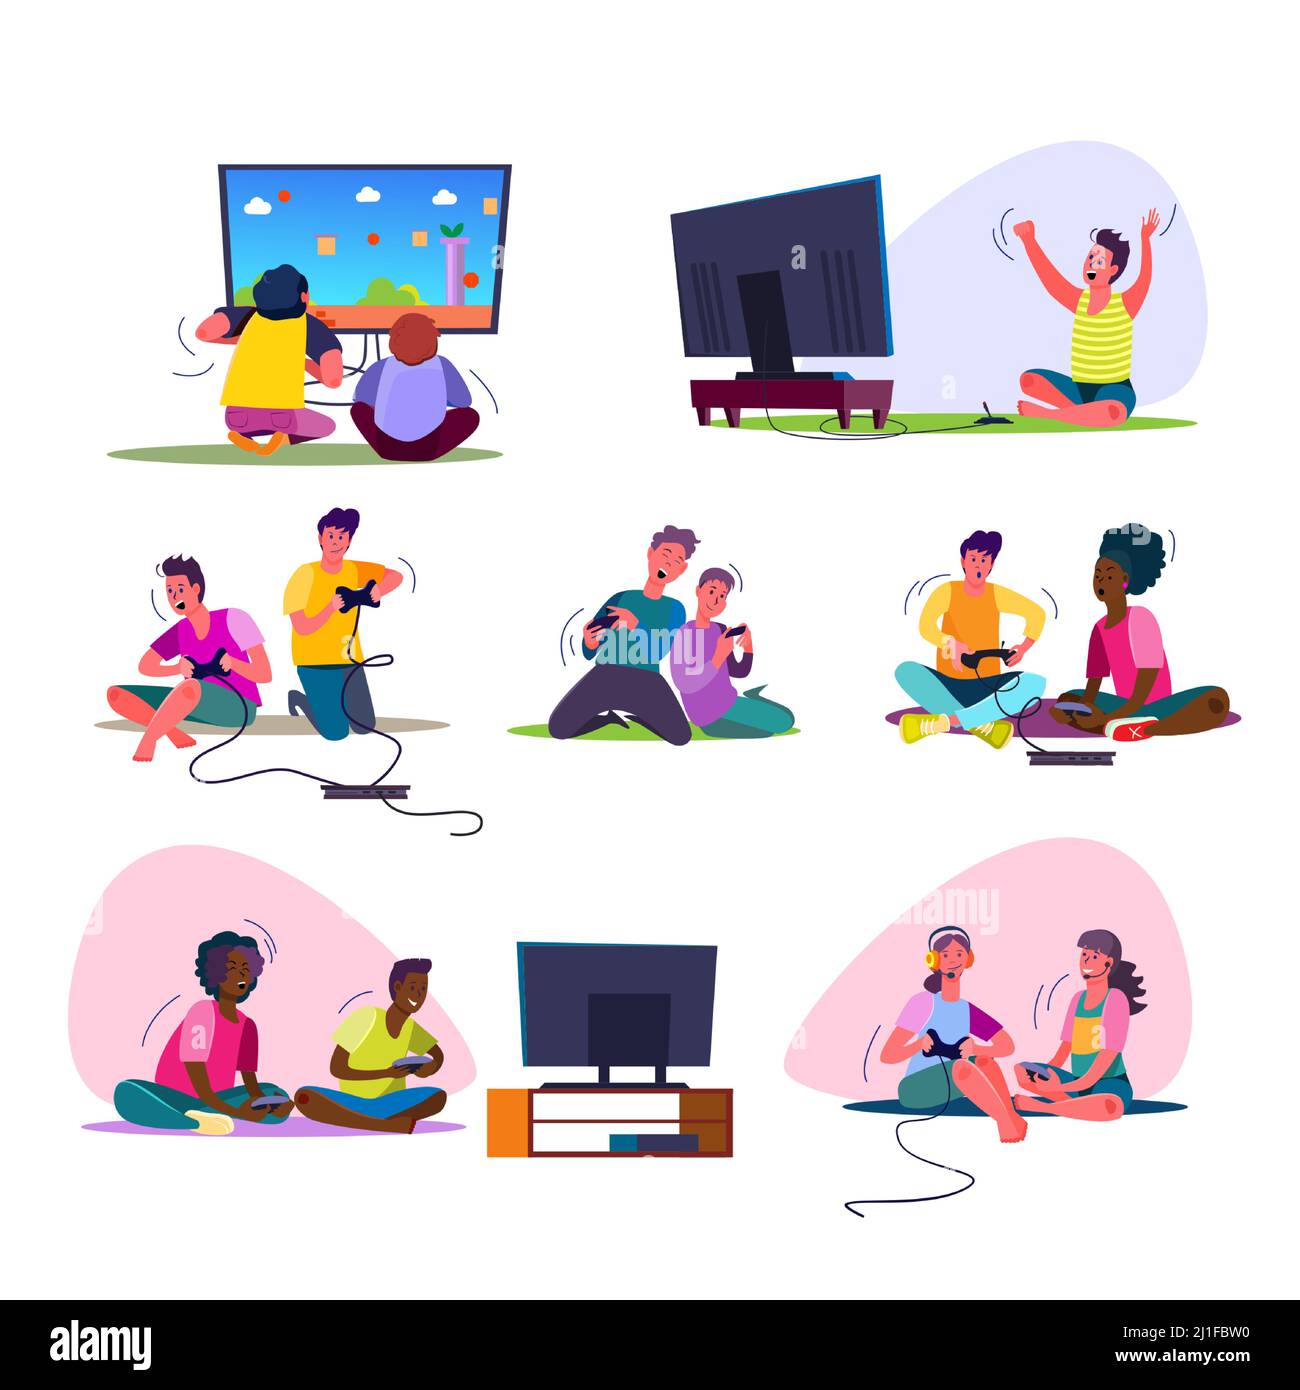 Excited video gamers set. Teenagers playing videogames, sitting at TV, using console, controller, gamepad, shouting. People concept. Vector illustrati Stock Vector